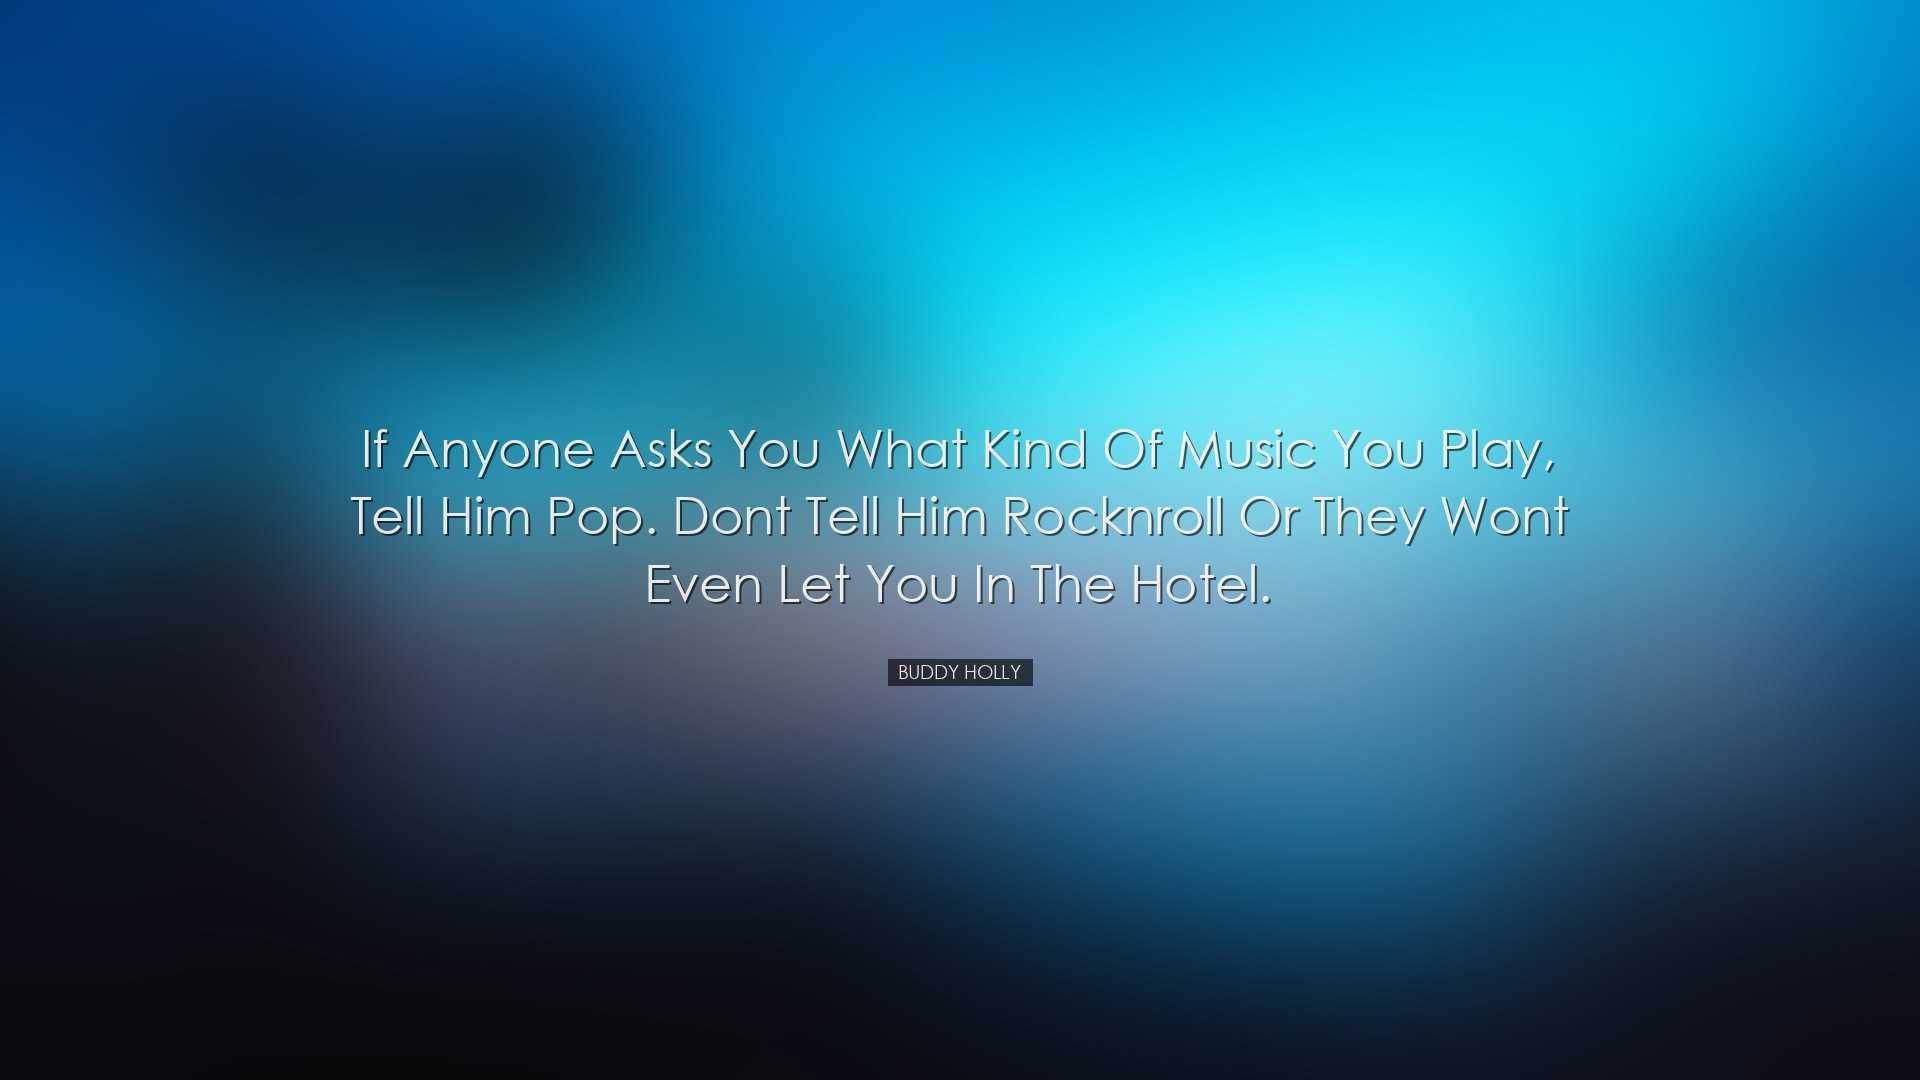 If anyone asks you what kind of music you play, tell him pop. Dont